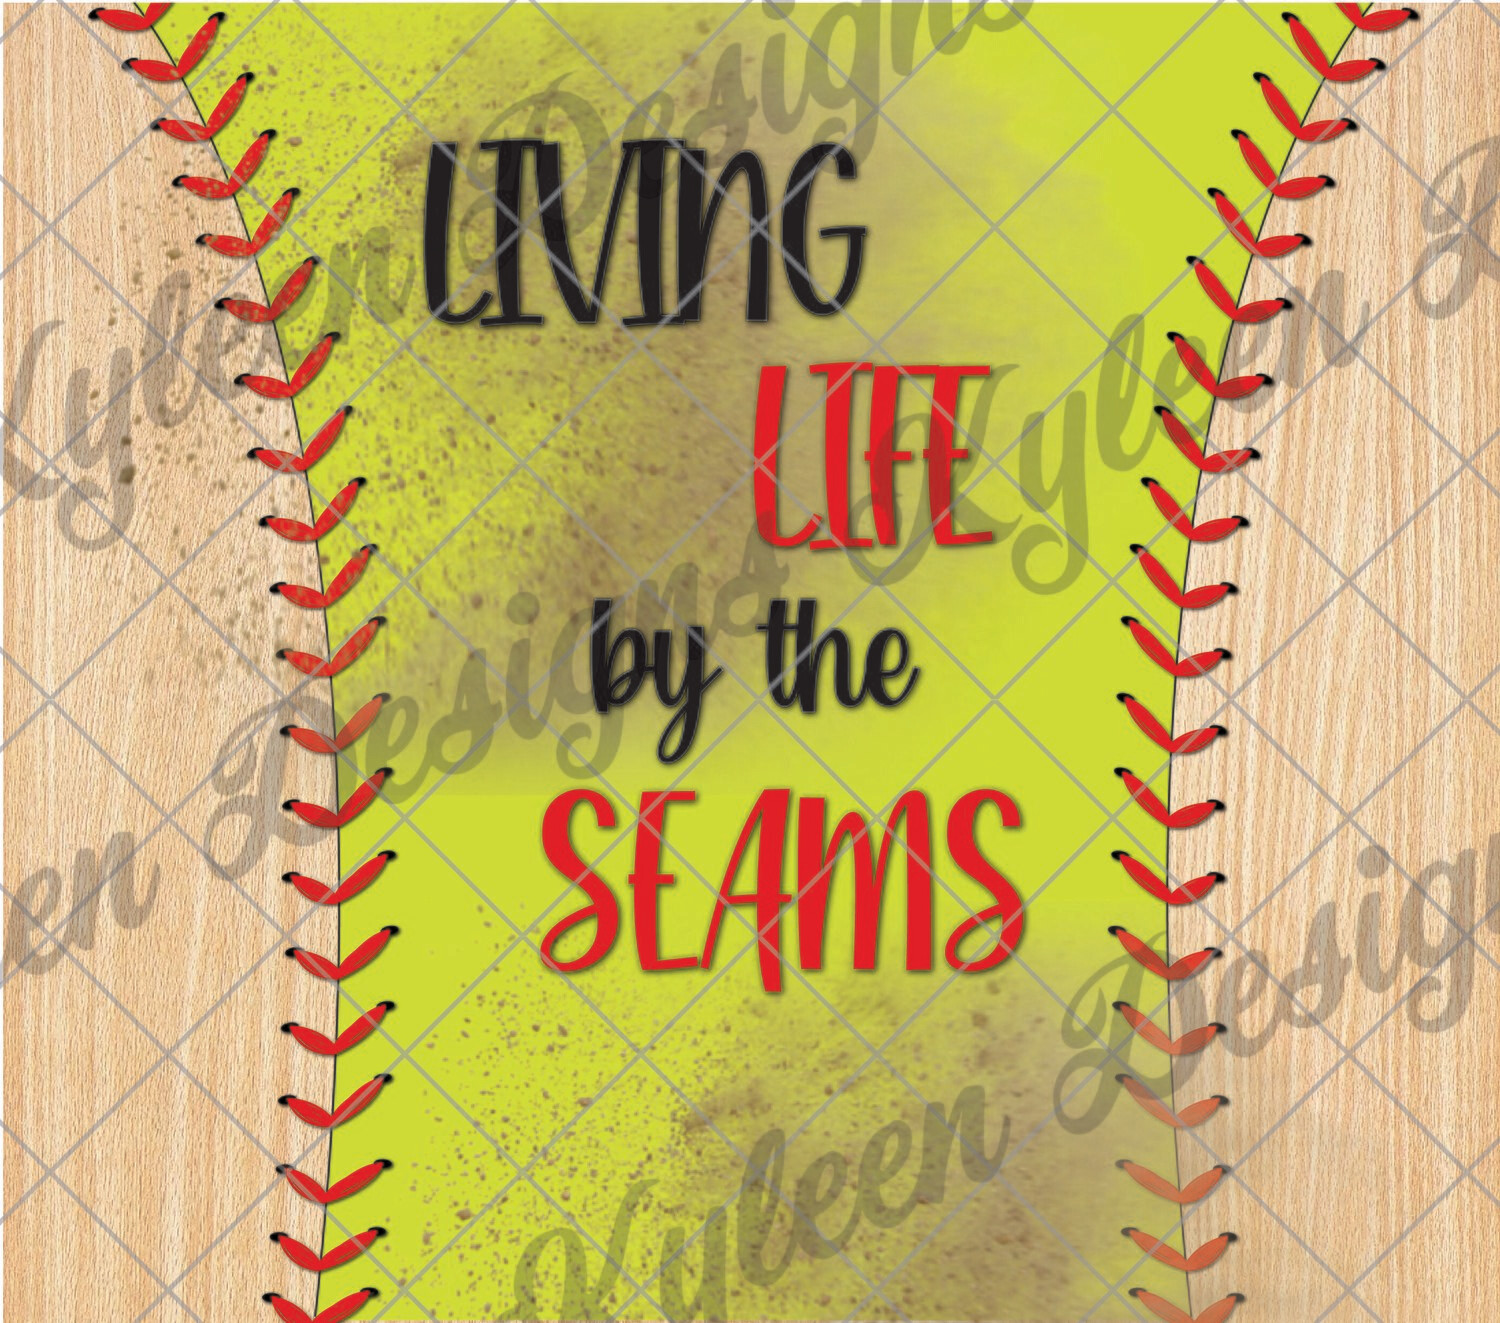 20 ounce straight living life by the seams softball wrap for sublimation, waterslide High res PNG digital file